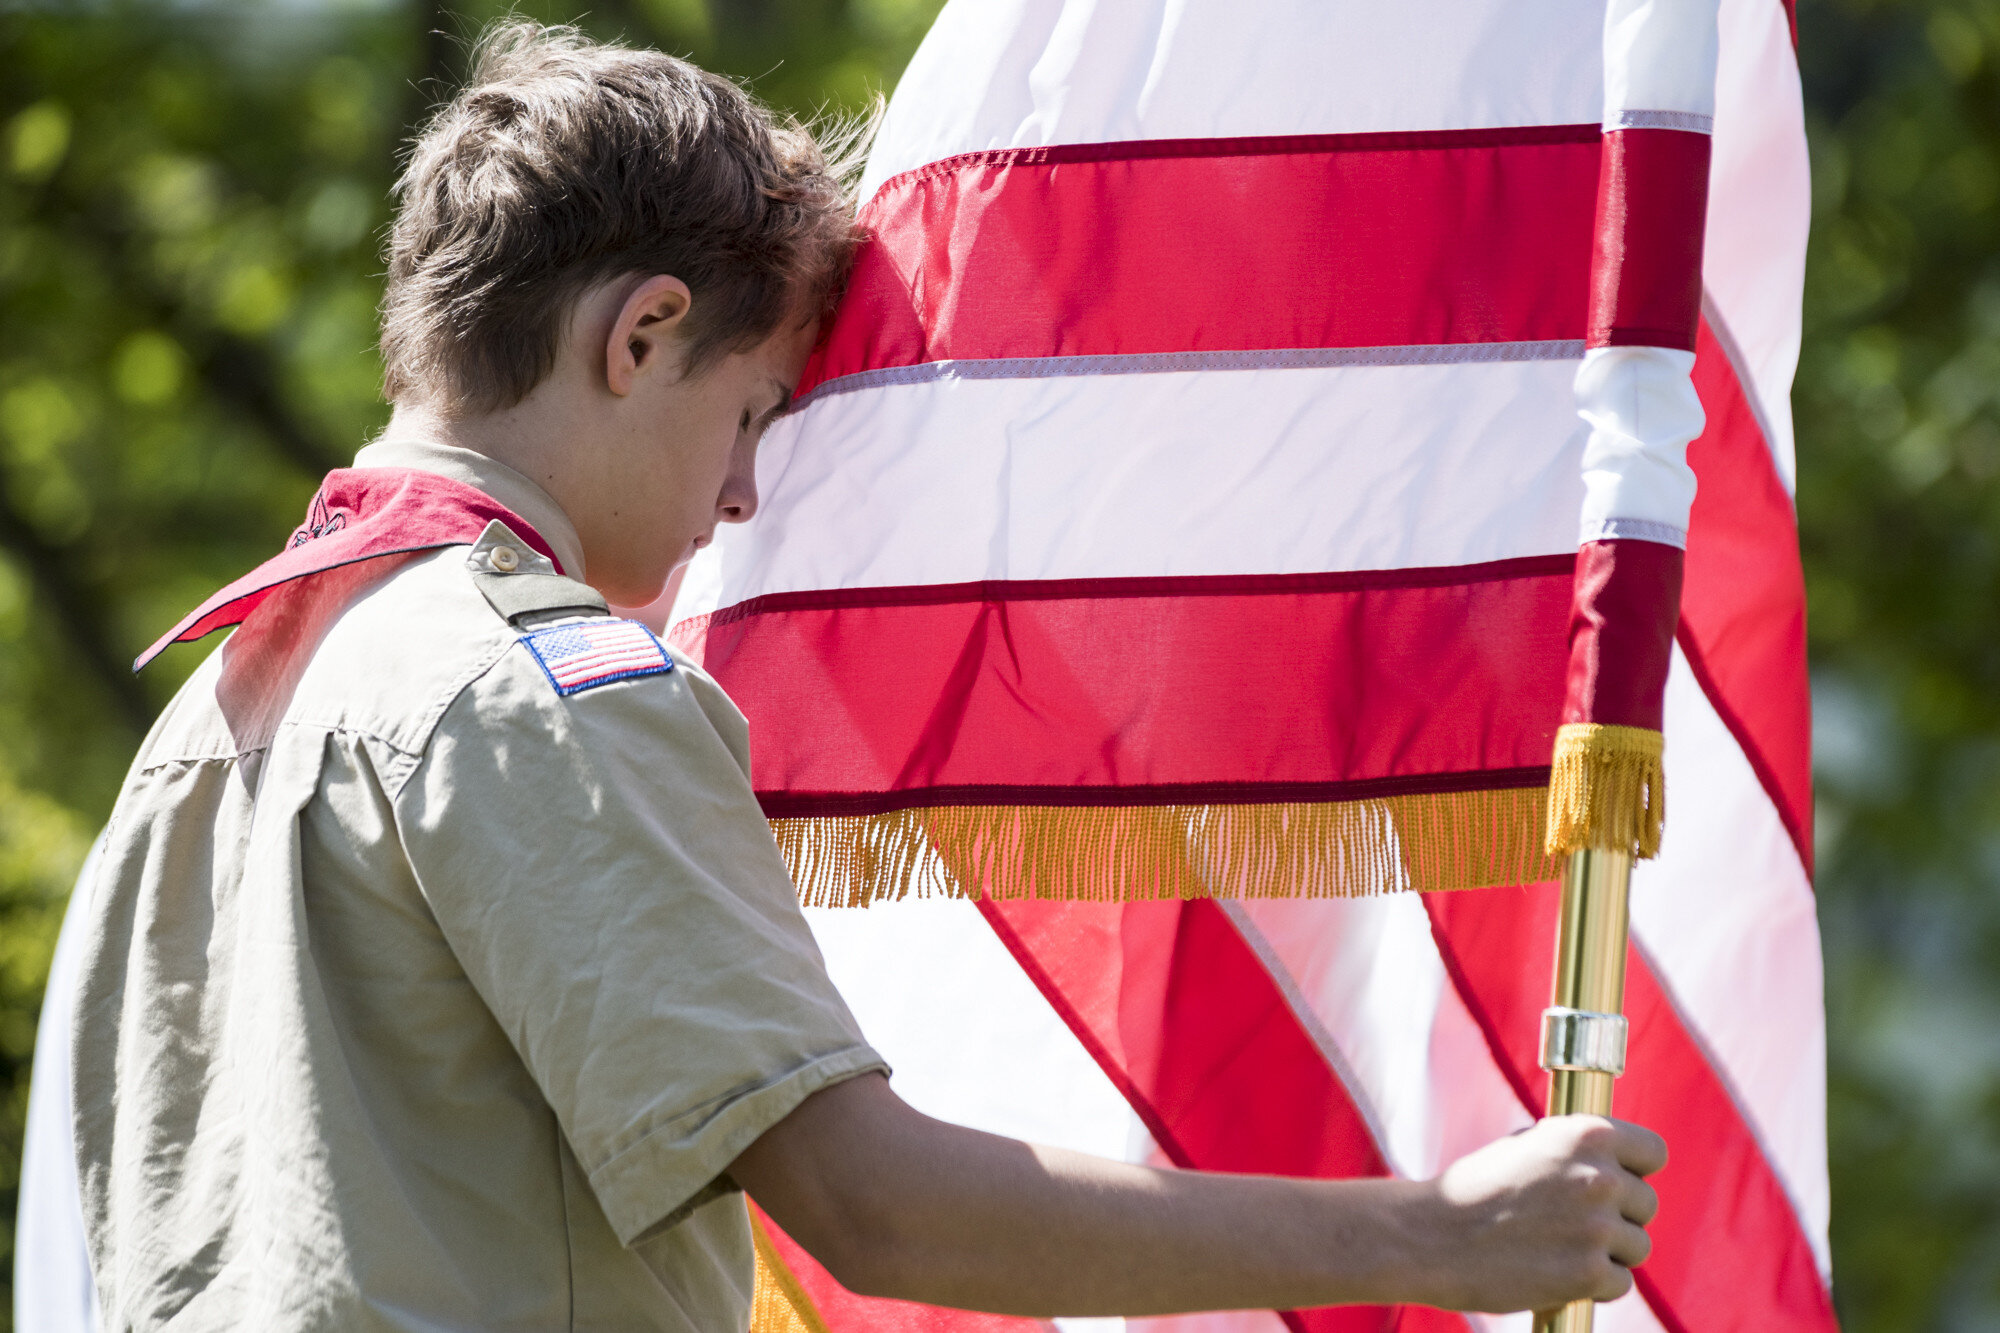  Elijah Myer of Boy Scout Troop 759 holds steady a windy American flag during a moment of remembrance while serving as the color guard for a Memorial Day Commemoration in Northfield, VT on Monday, May 27th 2019. 